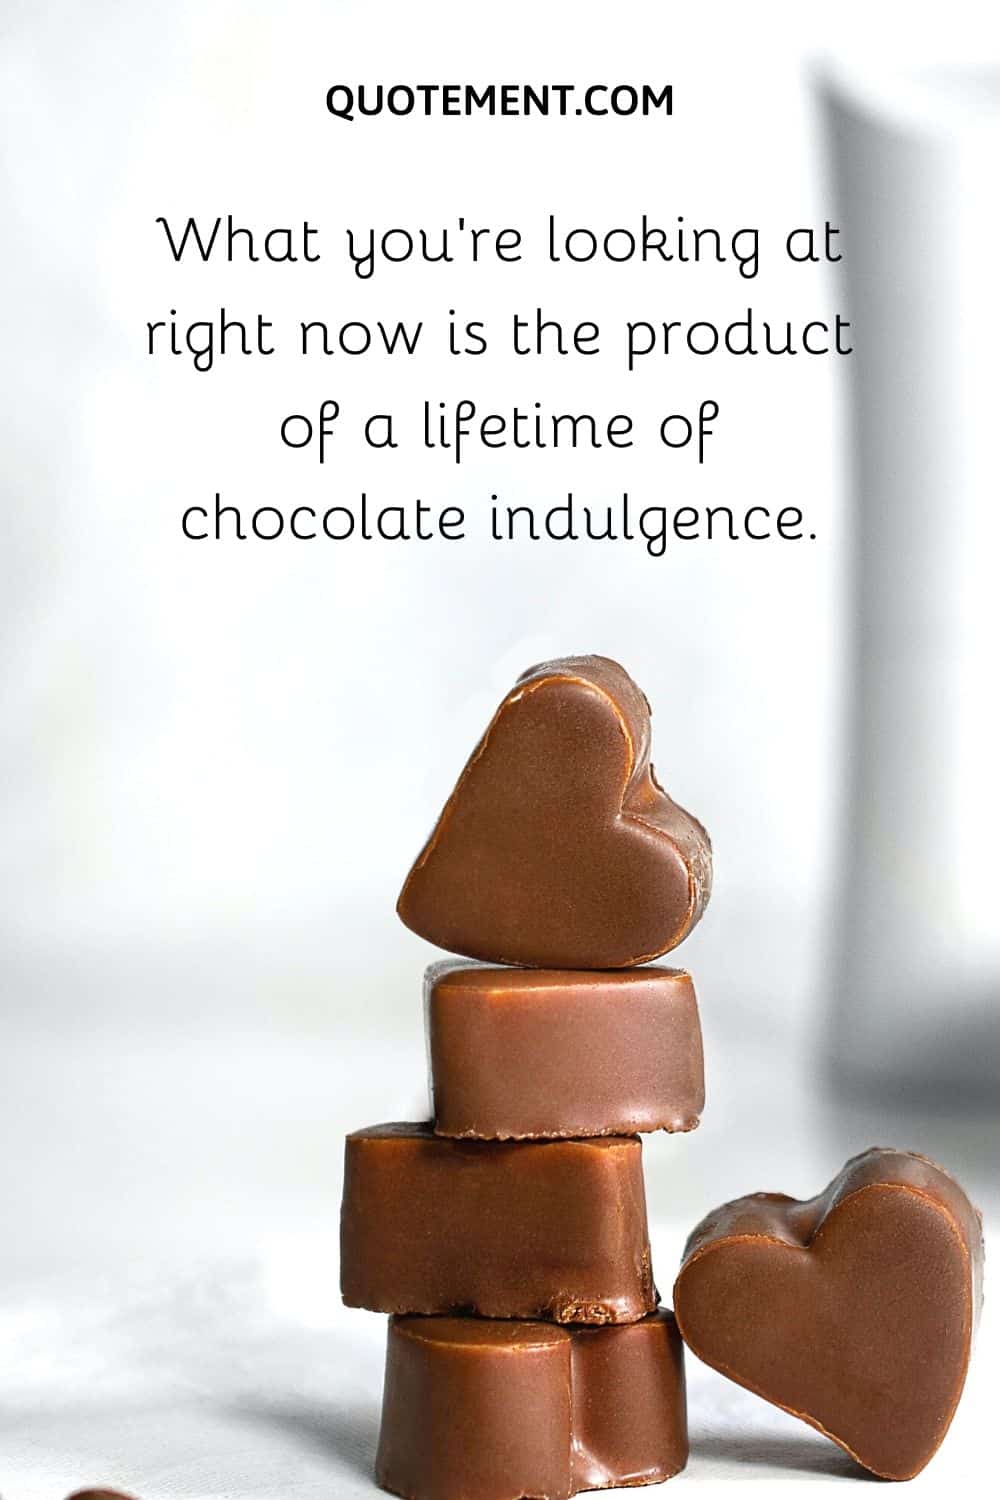 What you’re looking at right now is the product of a lifetime of chocolate indulgence.